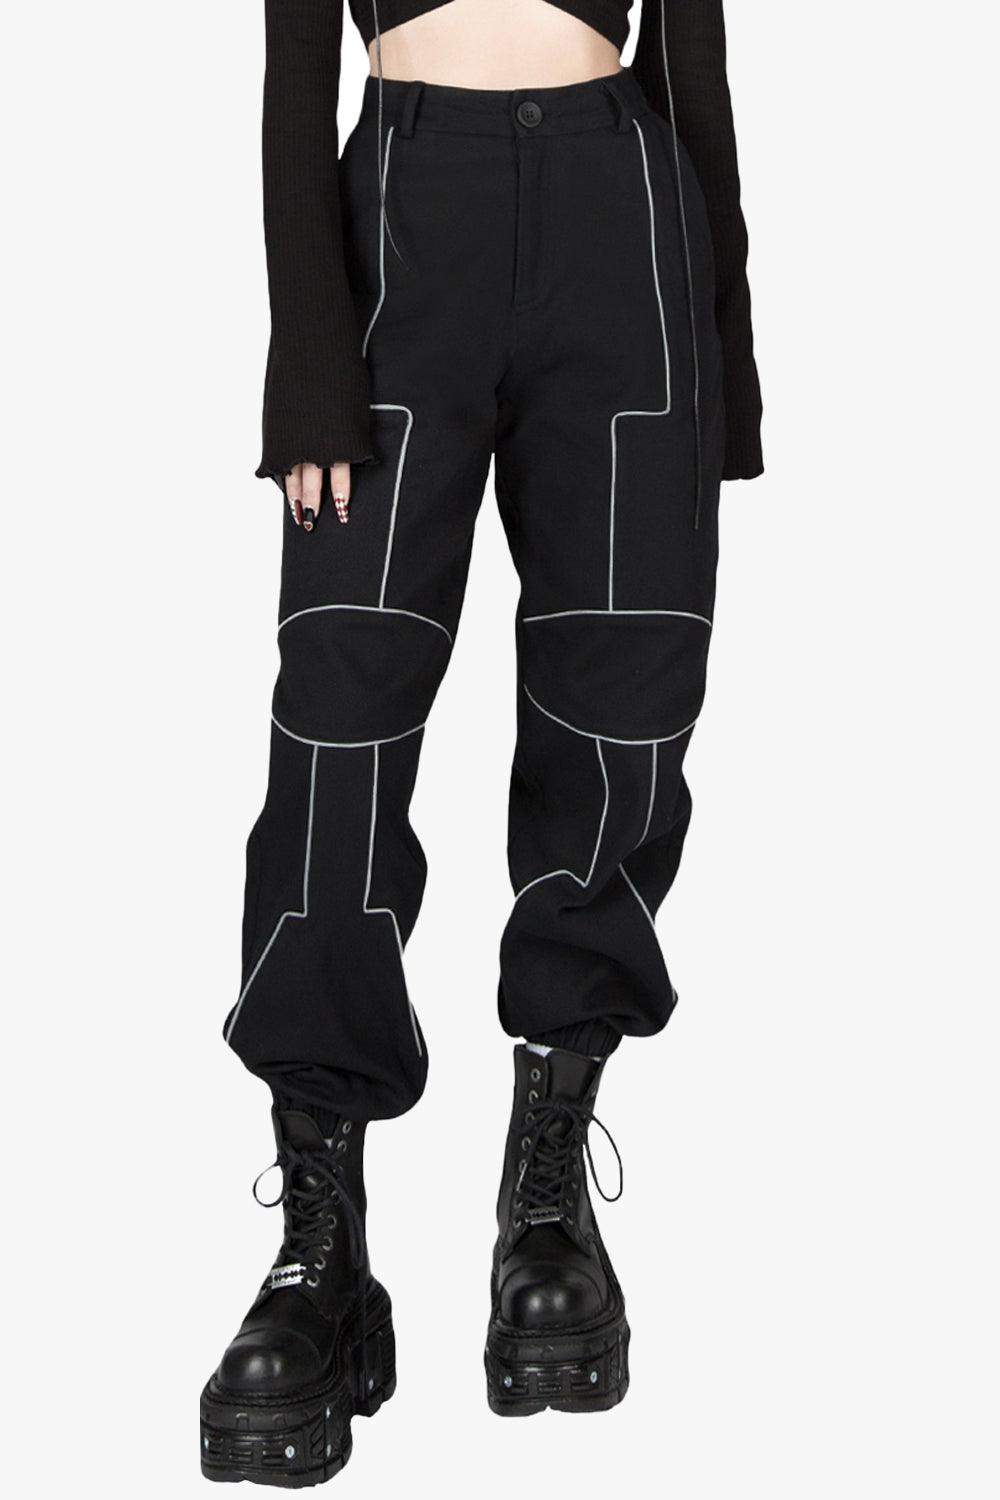 E-Girl Gothic Y2K Cyber Punk Cargo Pants Gamer Girl Aesthetic Outfit –  Aesthetics Boutique